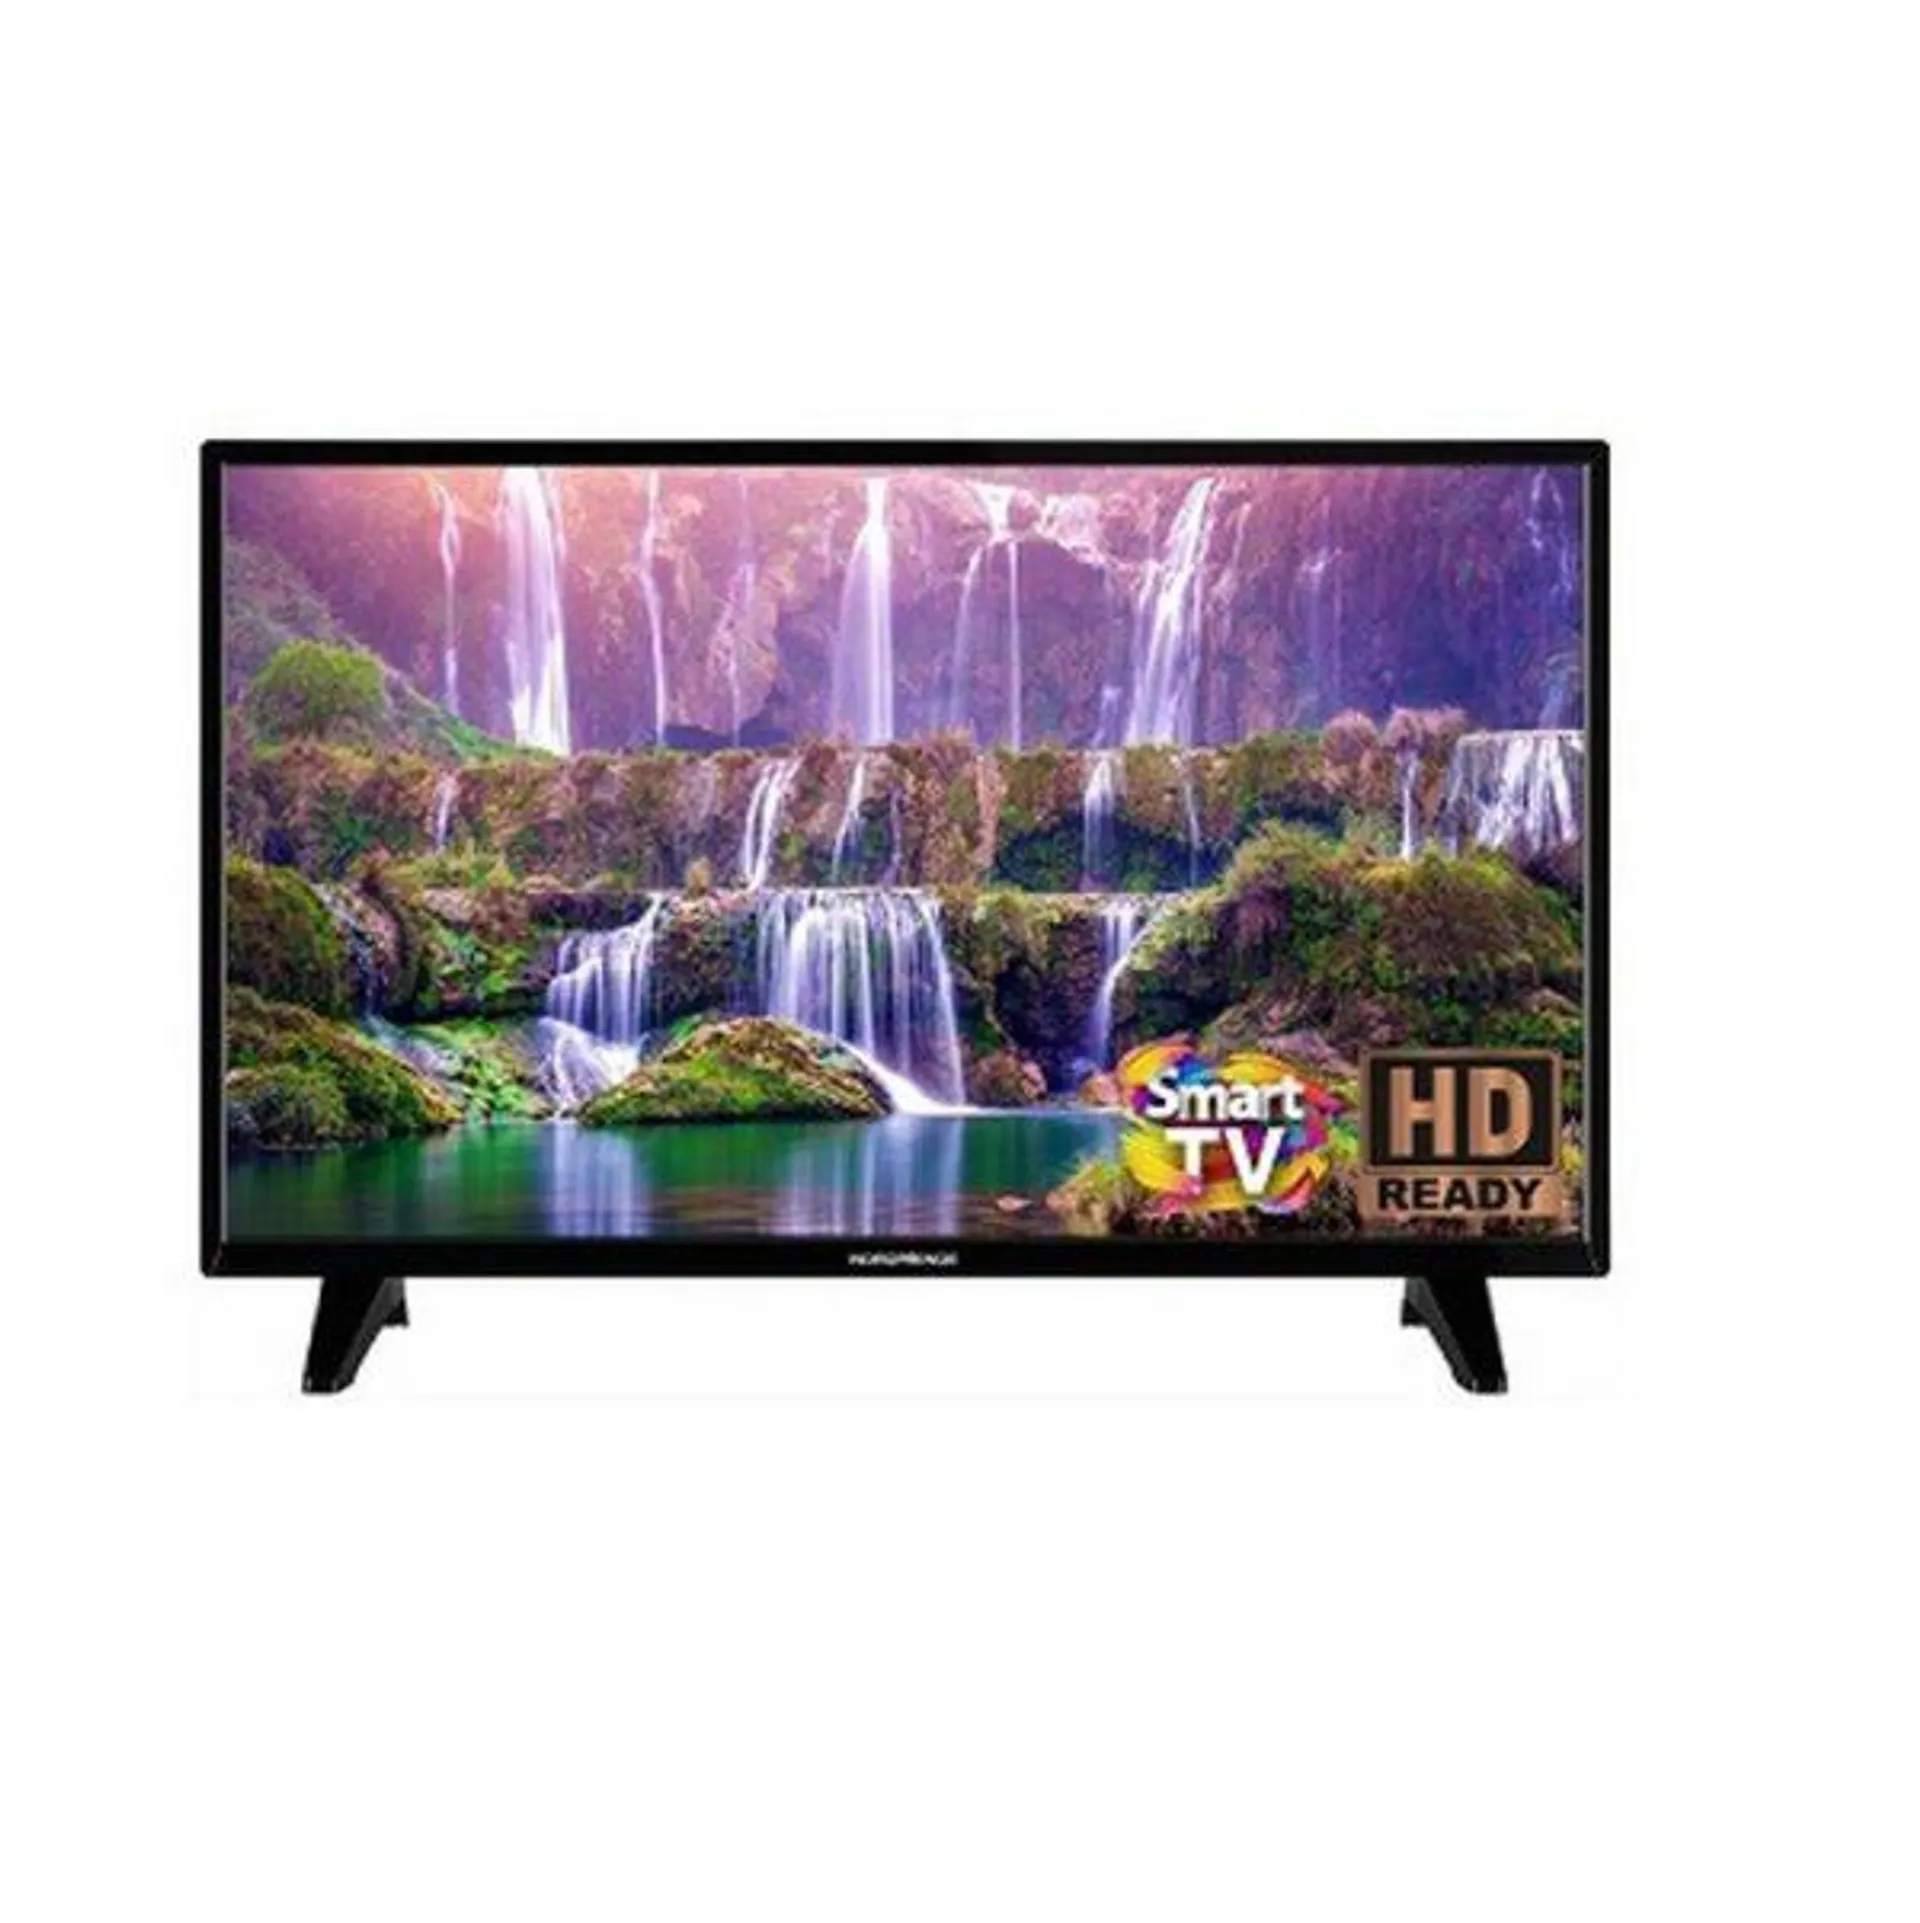 NordMende 32″ DLED HD Ready Smart Television